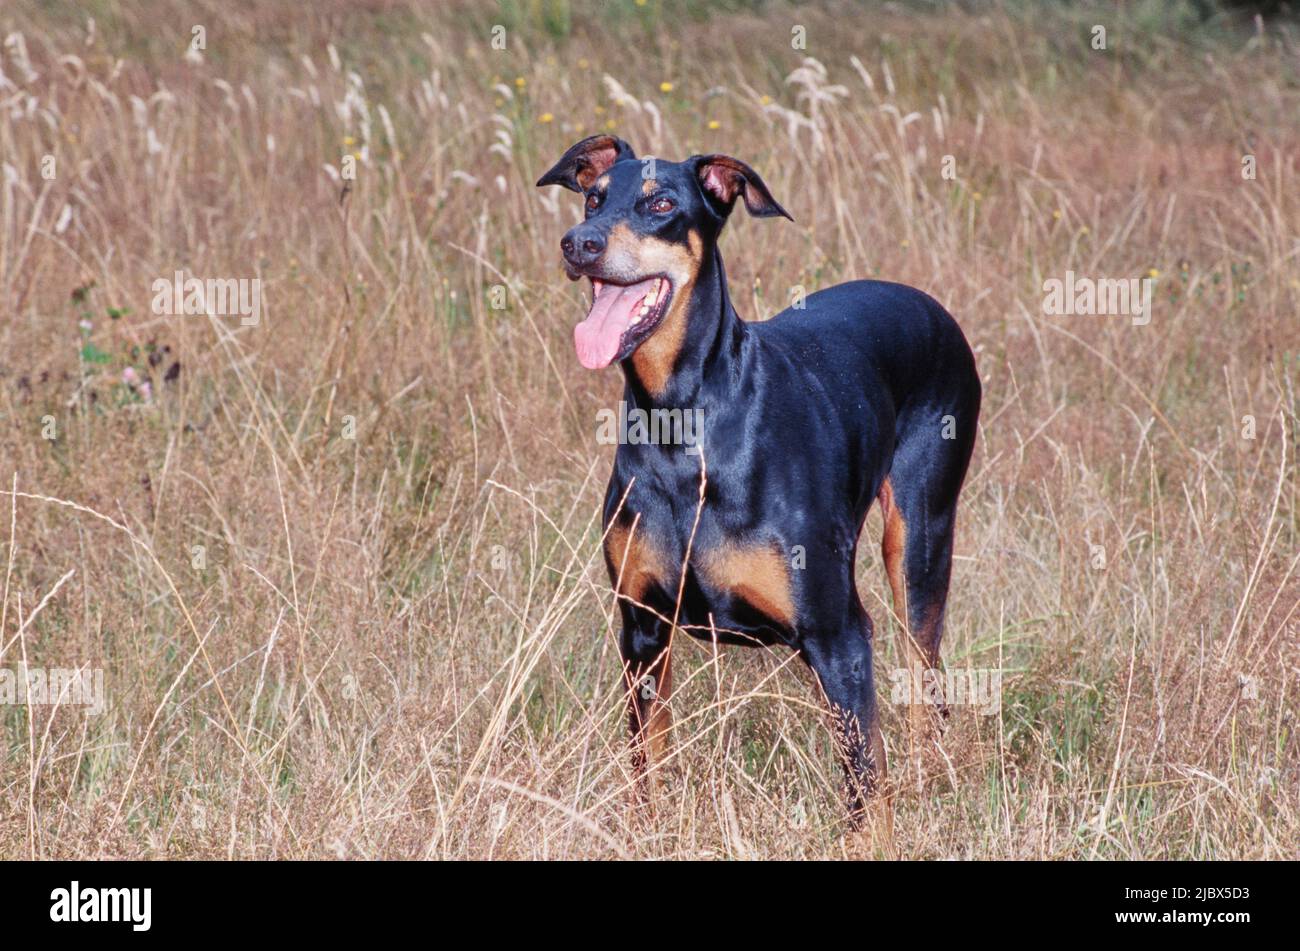 A Doberman standing in dry grass Stock Photo